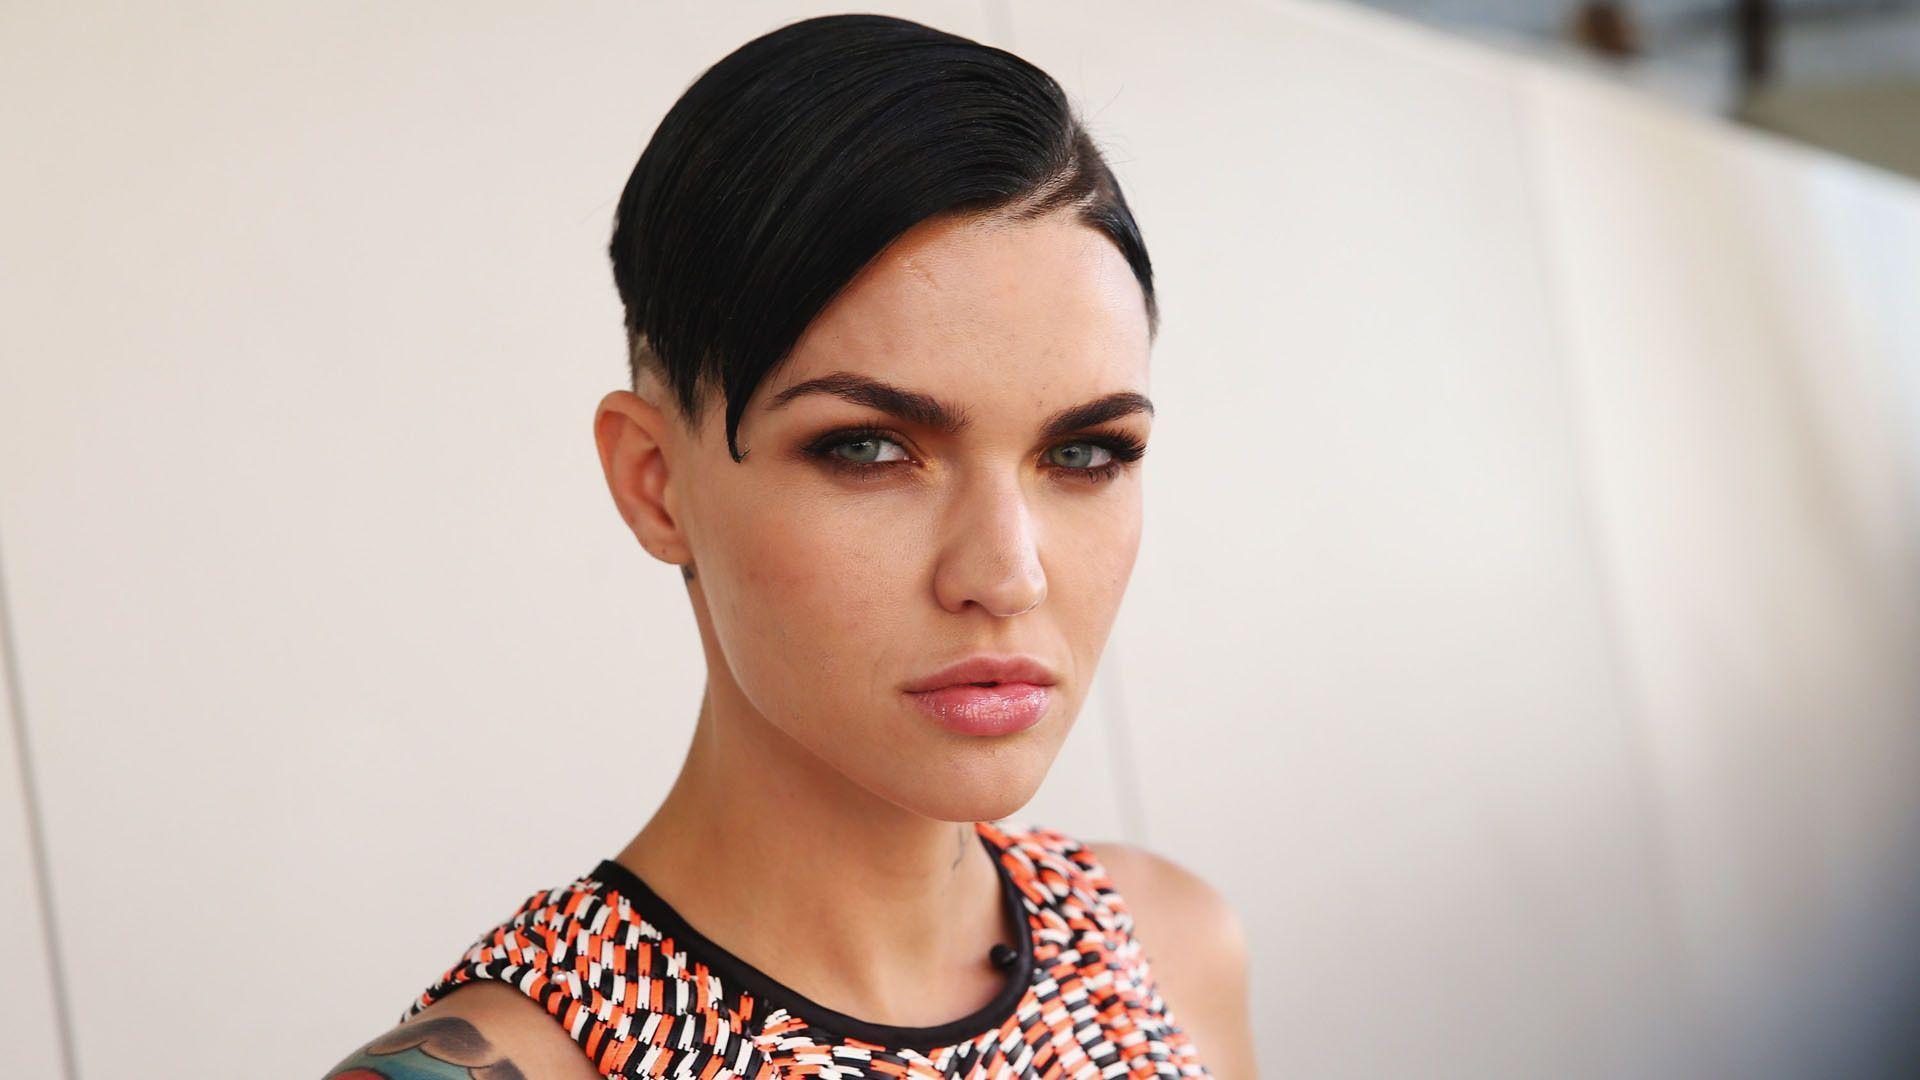 Ruby Rose Wallpaper Image Photo Picture Background